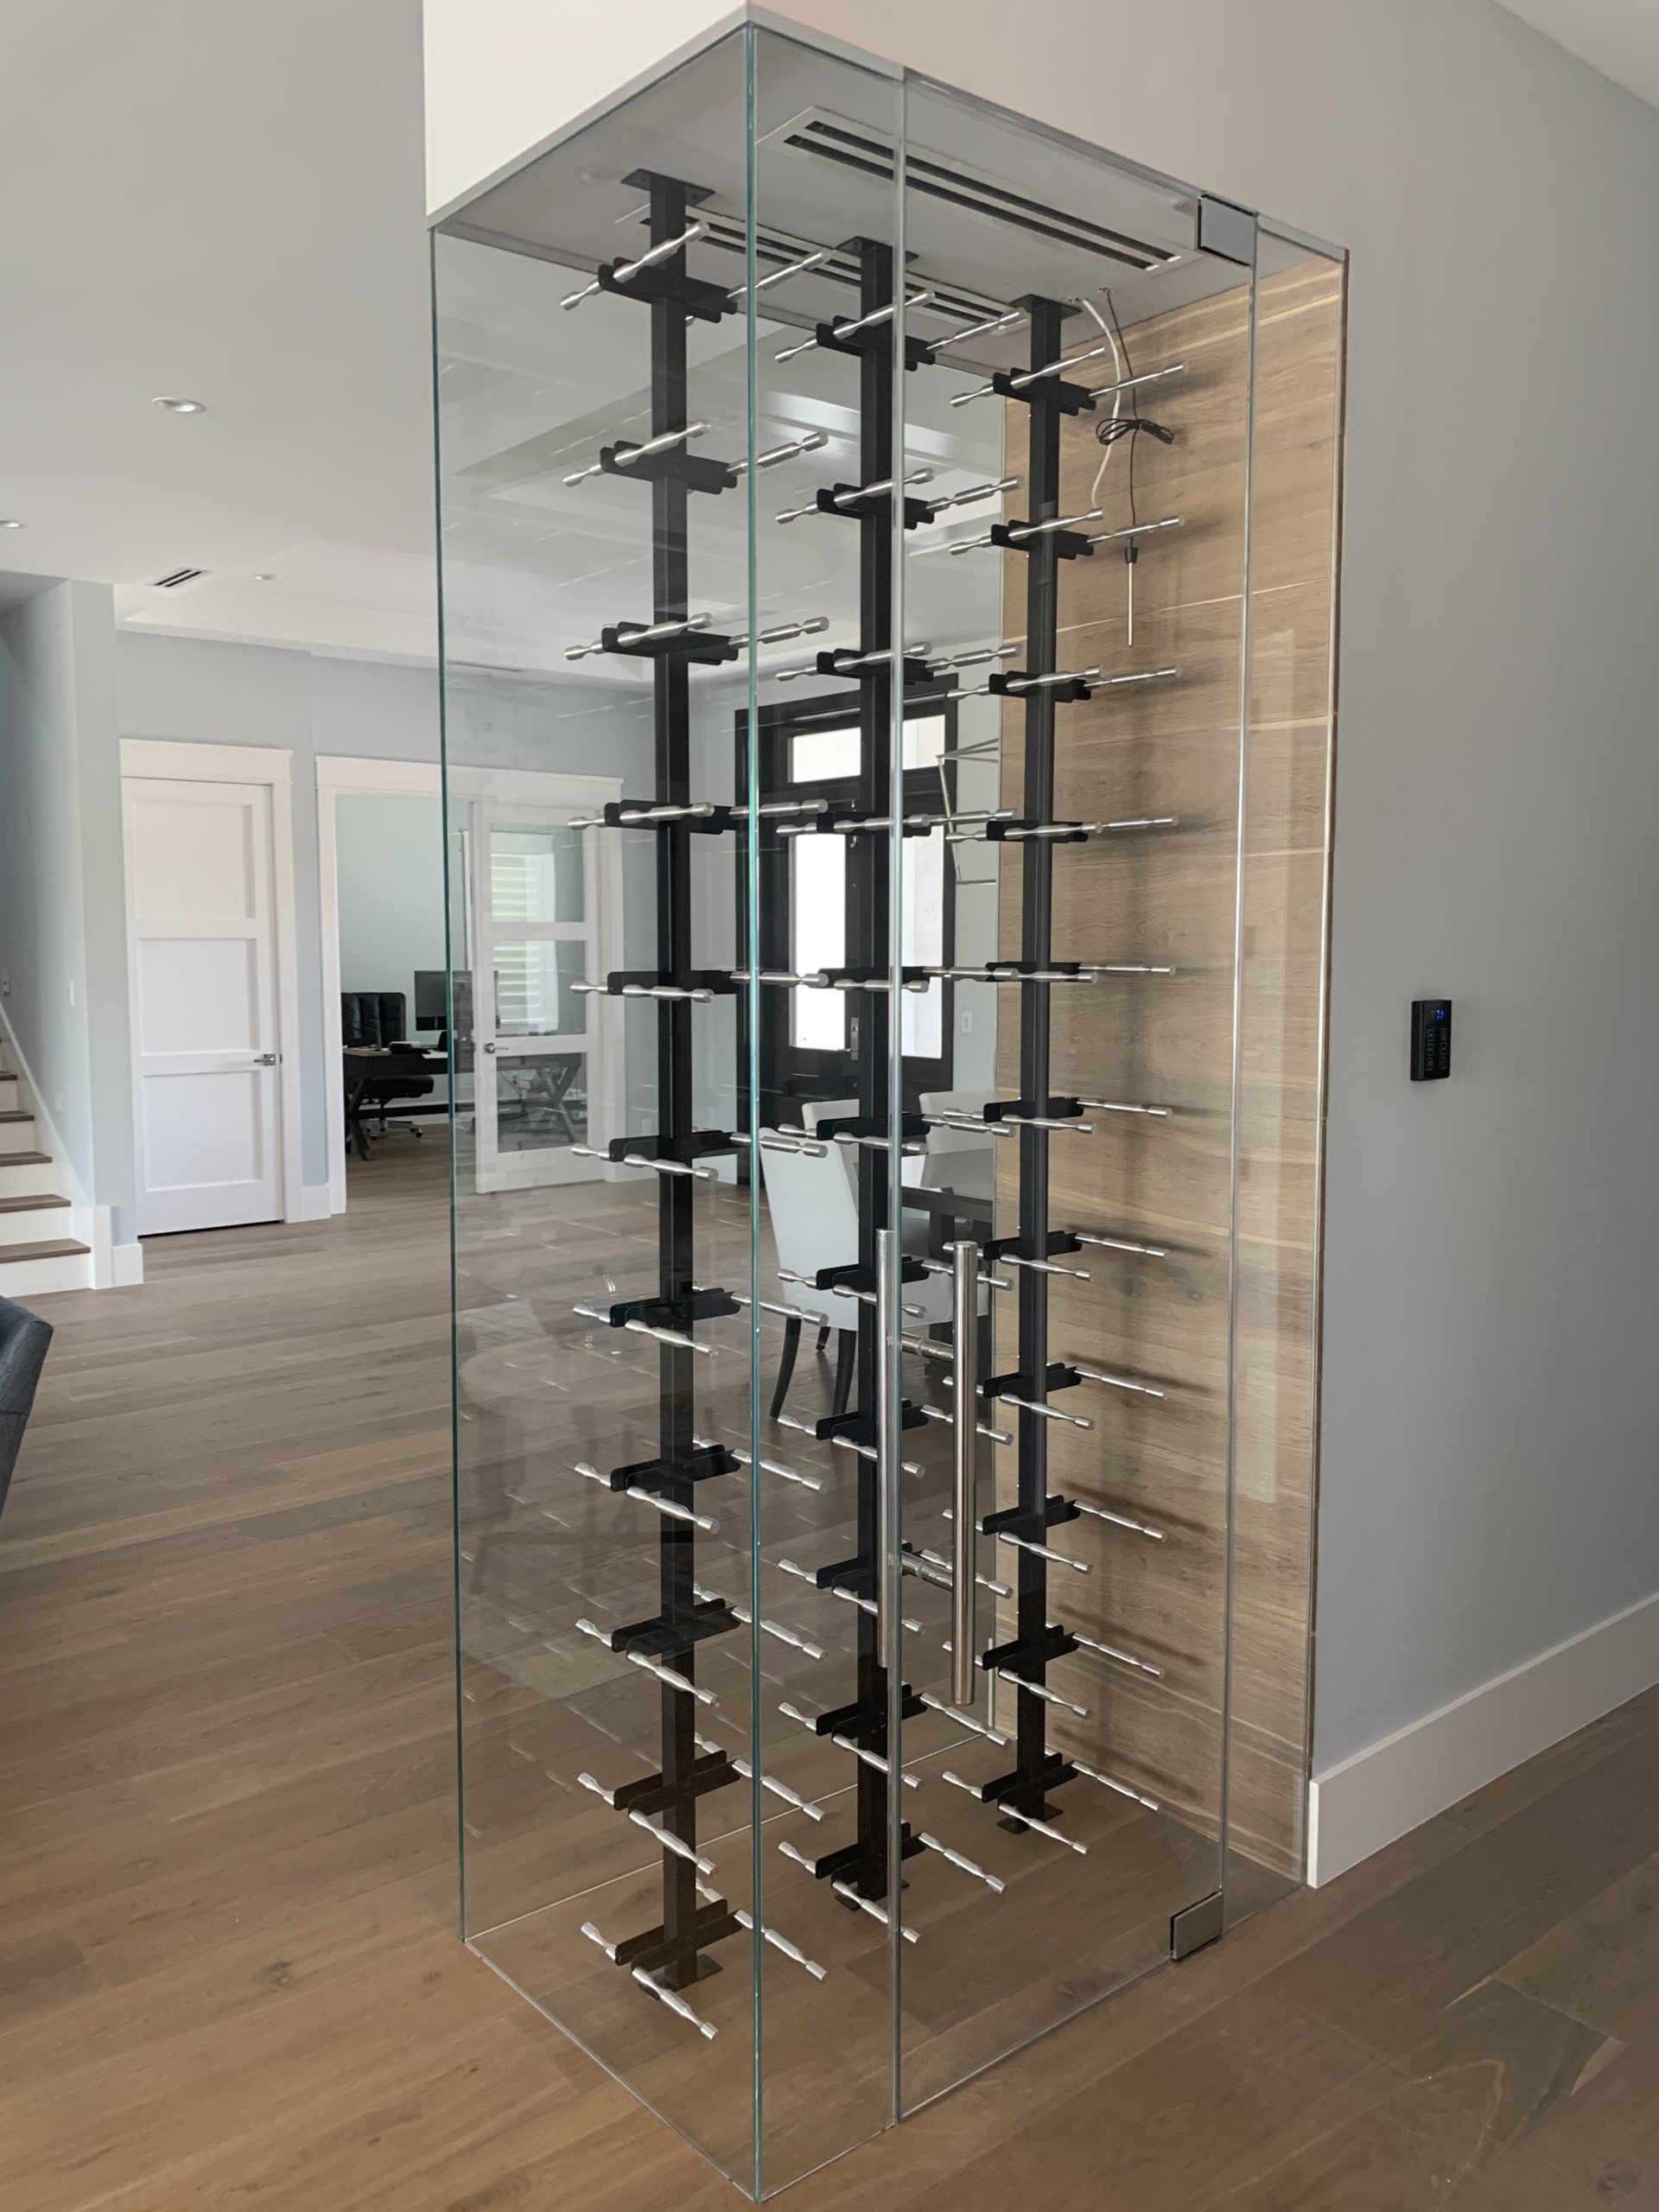 Designing And Building A Contemporary Glass Residential Wine Wall Custom Wine Cellars San